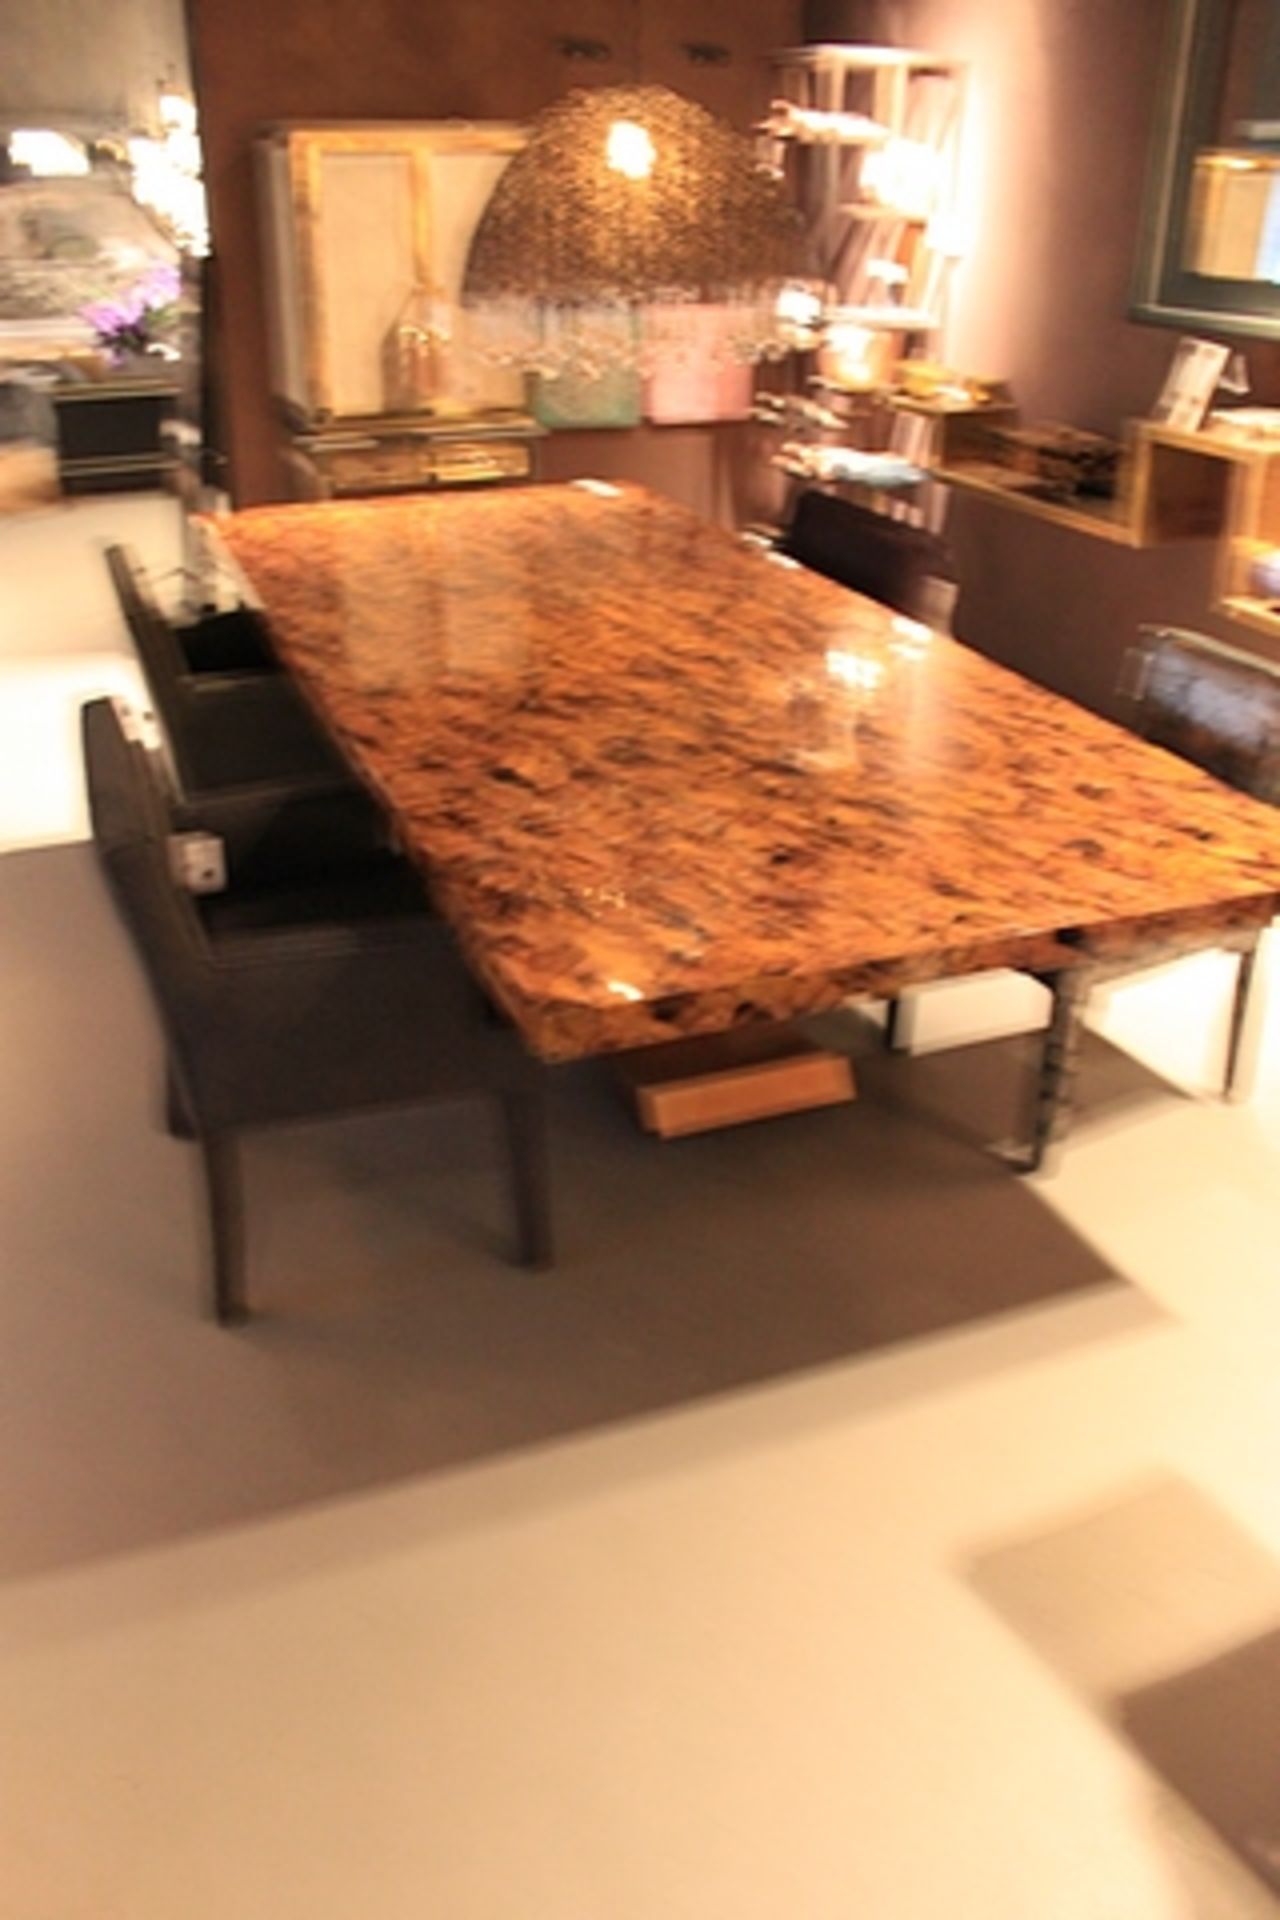 Dining Table C's a simply beautiful piece of furniture crafted from hand-cracked penn shells in